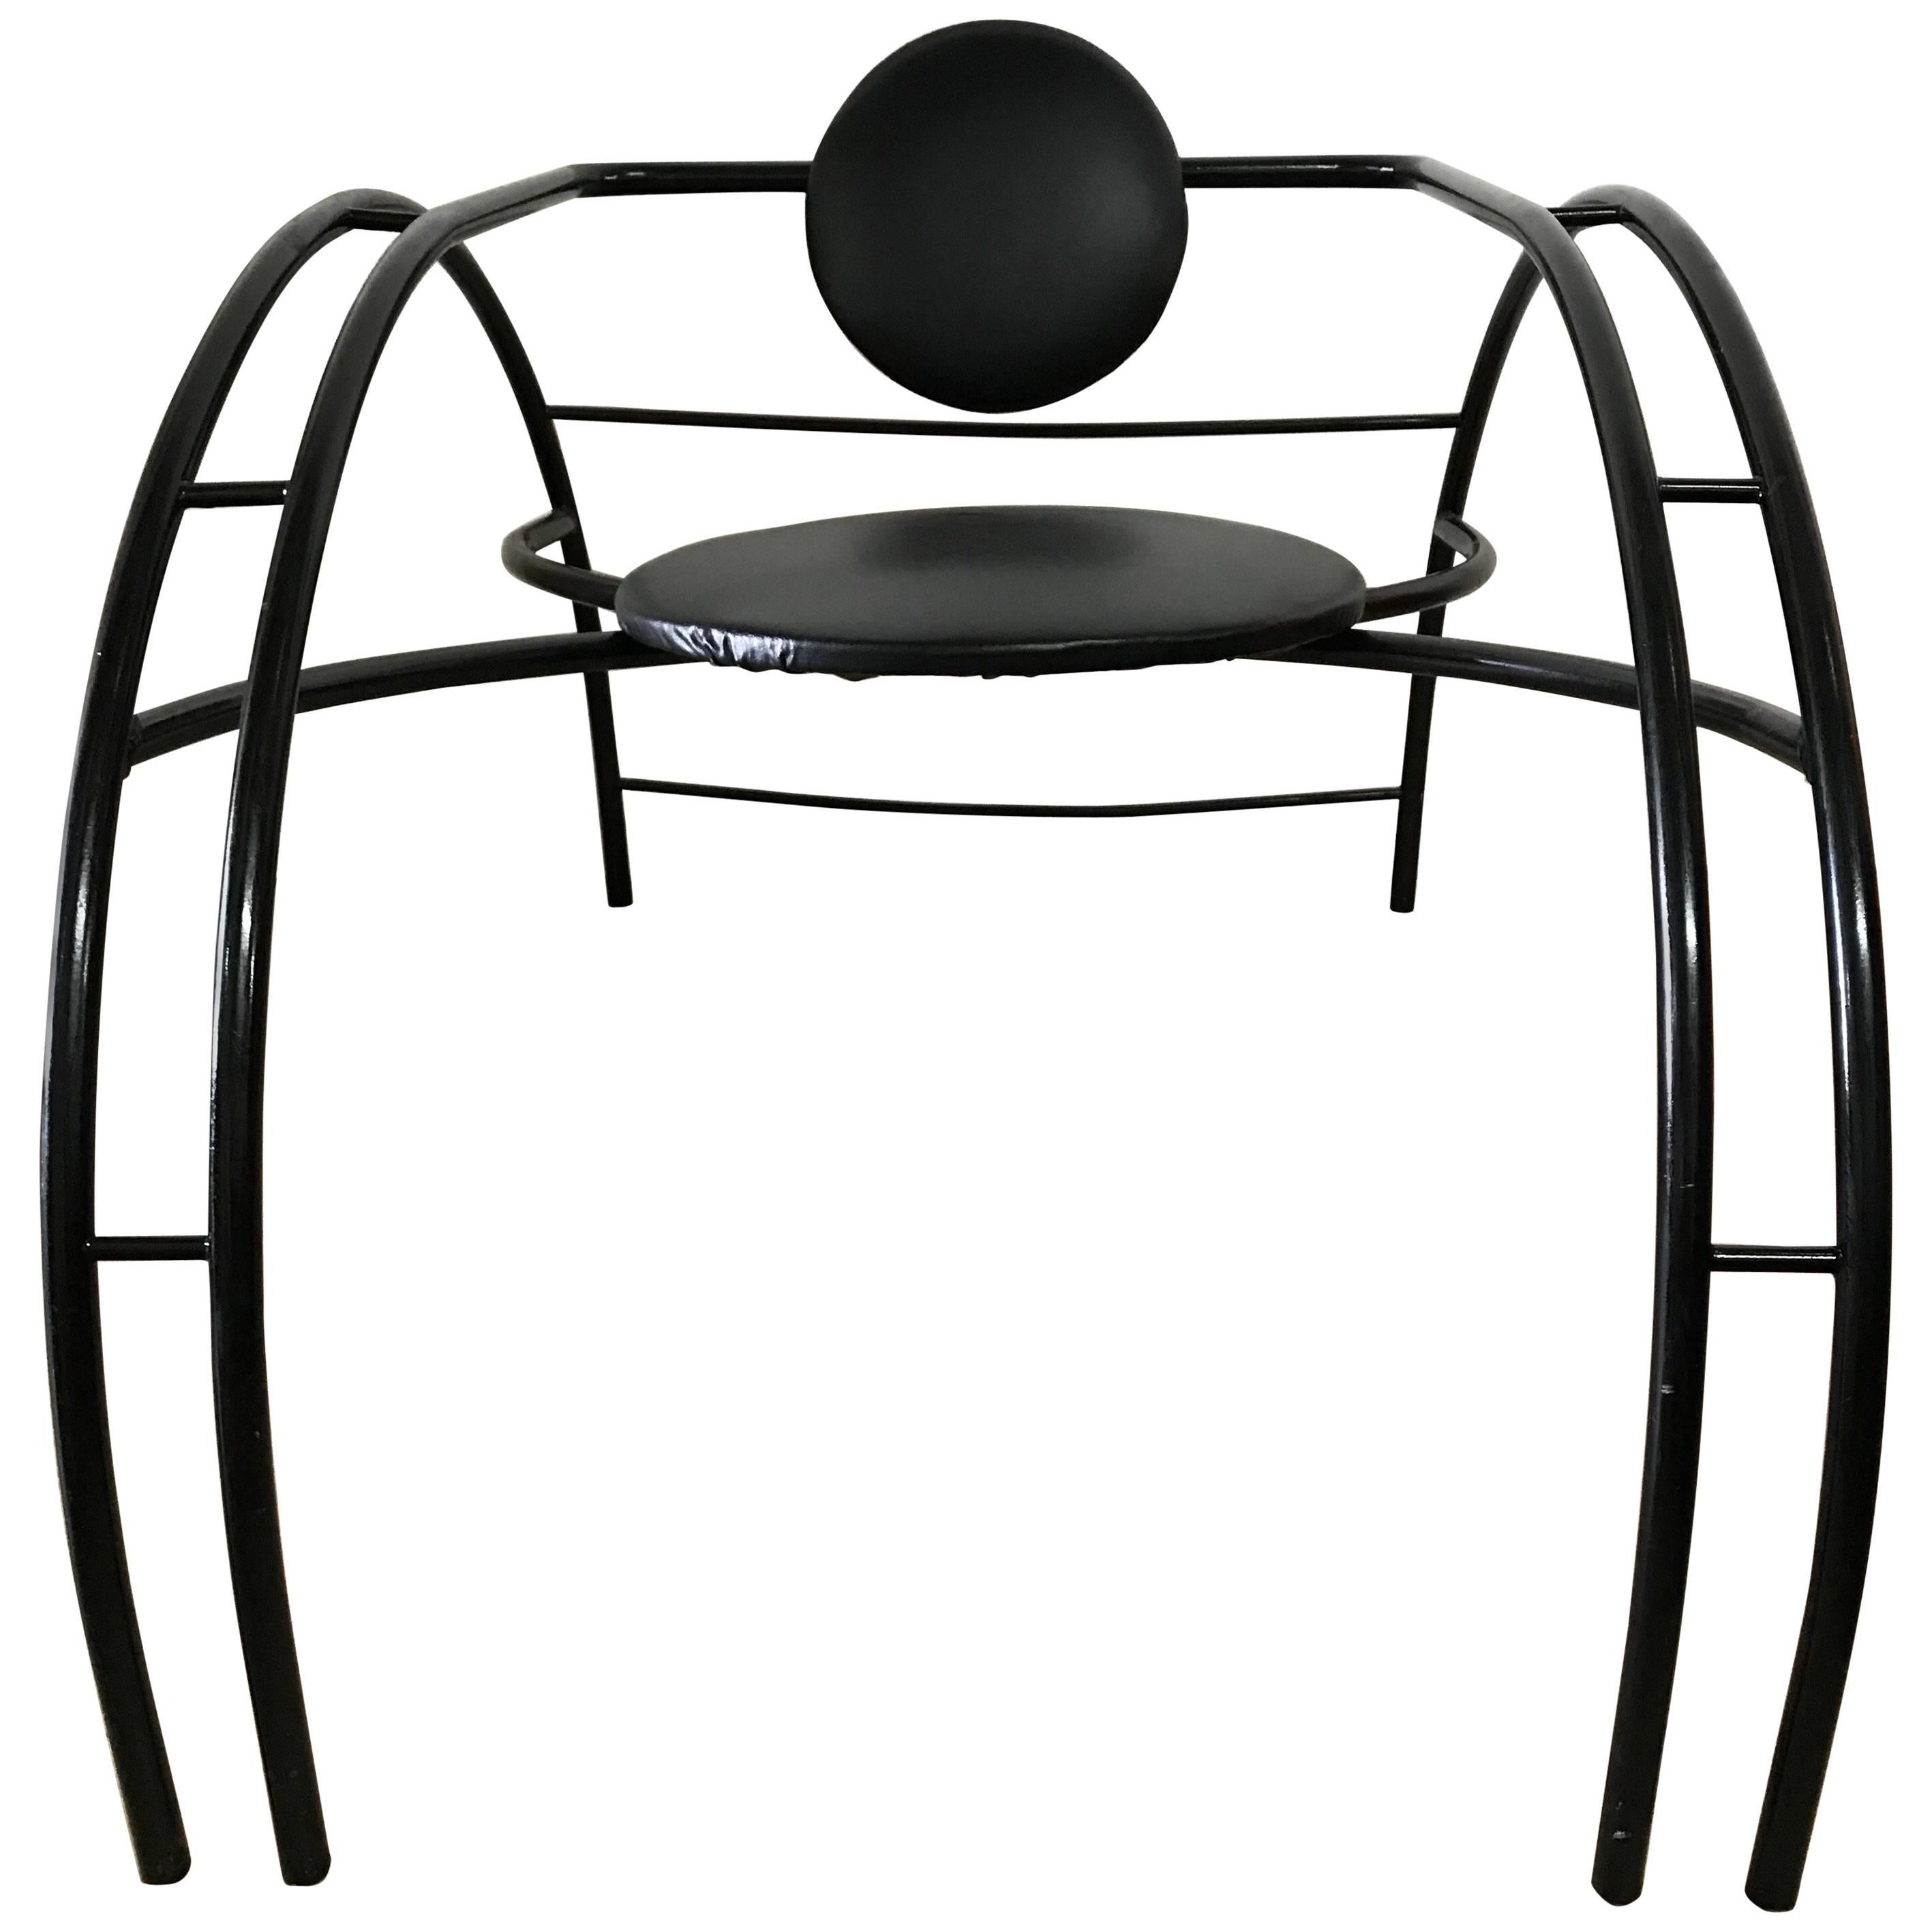 "Quebec 69" Spider Armchair by Les Amisca